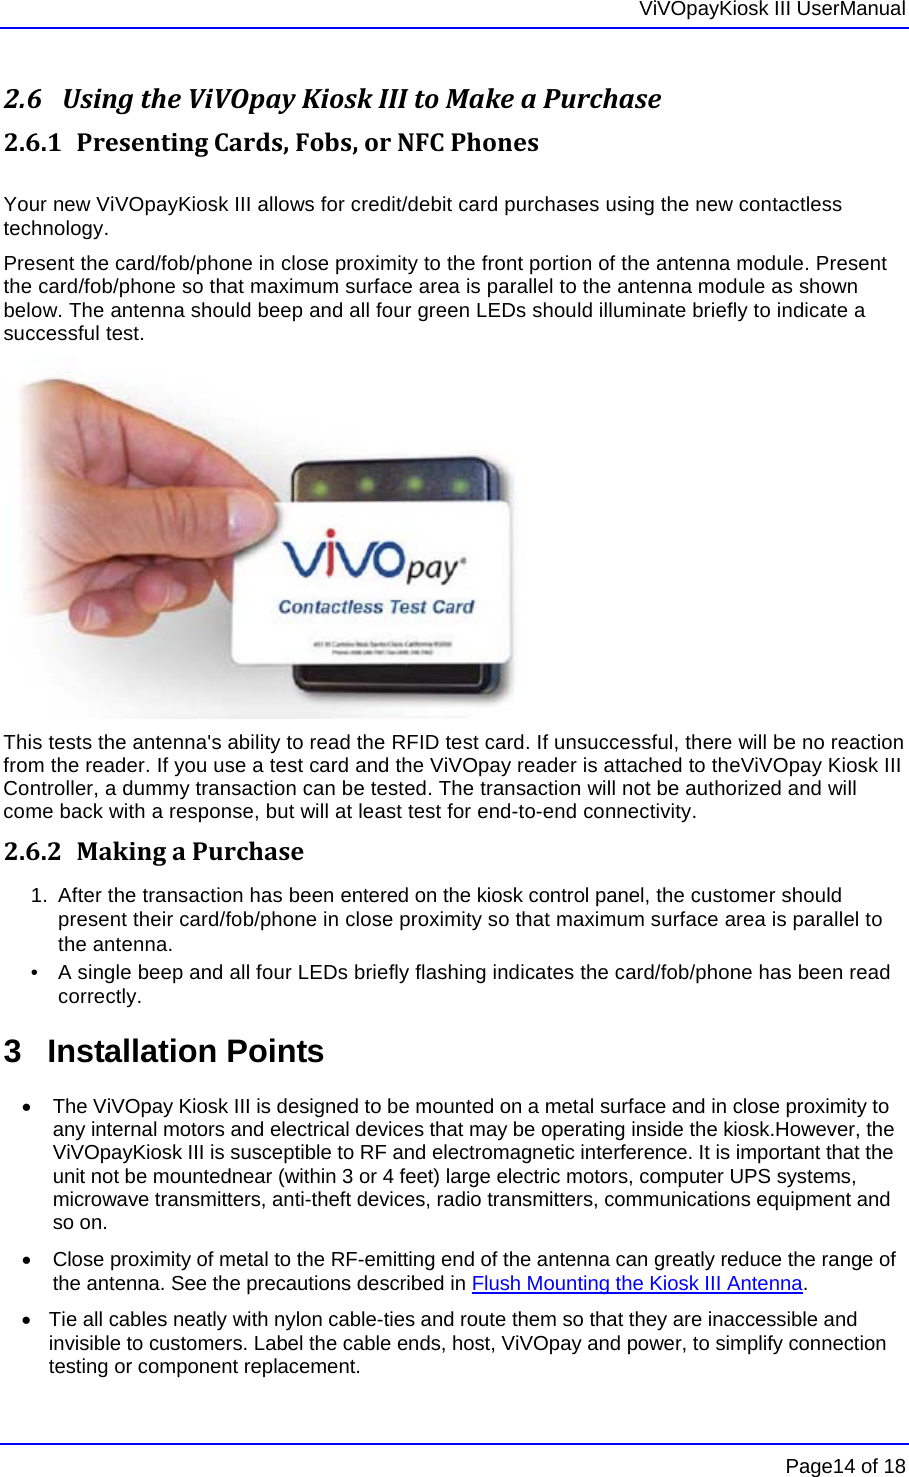   ViVOpayKiosk III UserManual      Page14 of 18 2.6 UsingtheViVOpayKioskIIItoMakeaPurchase2.6.1 PresentingCards,Fobs,orNFCPhones Your new ViVOpayKiosk III allows for credit/debit card purchases using the new contactless technology. Present the card/fob/phone in close proximity to the front portion of the antenna module. Present the card/fob/phone so that maximum surface area is parallel to the antenna module as shown below. The antenna should beep and all four green LEDs should illuminate briefly to indicate a successful test.  This tests the antenna&apos;s ability to read the RFID test card. If unsuccessful, there will be no reaction from the reader. If you use a test card and the ViVOpay reader is attached to theViVOpay Kiosk III Controller, a dummy transaction can be tested. The transaction will not be authorized and will come back with a response, but will at least test for end-to-end connectivity.  2.6.2 MakingaPurchase1.  After the transaction has been entered on the kiosk control panel, the customer should present their card/fob/phone in close proximity so that maximum surface area is parallel to the antenna.  •   A single beep and all four LEDs briefly flashing indicates the card/fob/phone has been read correctly. 3 Installation Points  •  The ViVOpay Kiosk III is designed to be mounted on a metal surface and in close proximity to any internal motors and electrical devices that may be operating inside the kiosk.However, the ViVOpayKiosk III is susceptible to RF and electromagnetic interference. It is important that the unit not be mountednear (within 3 or 4 feet) large electric motors, computer UPS systems, microwave transmitters, anti-theft devices, radio transmitters, communications equipment and so on. •  Close proximity of metal to the RF-emitting end of the antenna can greatly reduce the range of the antenna. See the precautions described in Flush Mounting the Kiosk III Antenna. •  Tie all cables neatly with nylon cable-ties and route them so that they are inaccessible and invisible to customers. Label the cable ends, host, ViVOpay and power, to simplify connection testing or component replacement. 